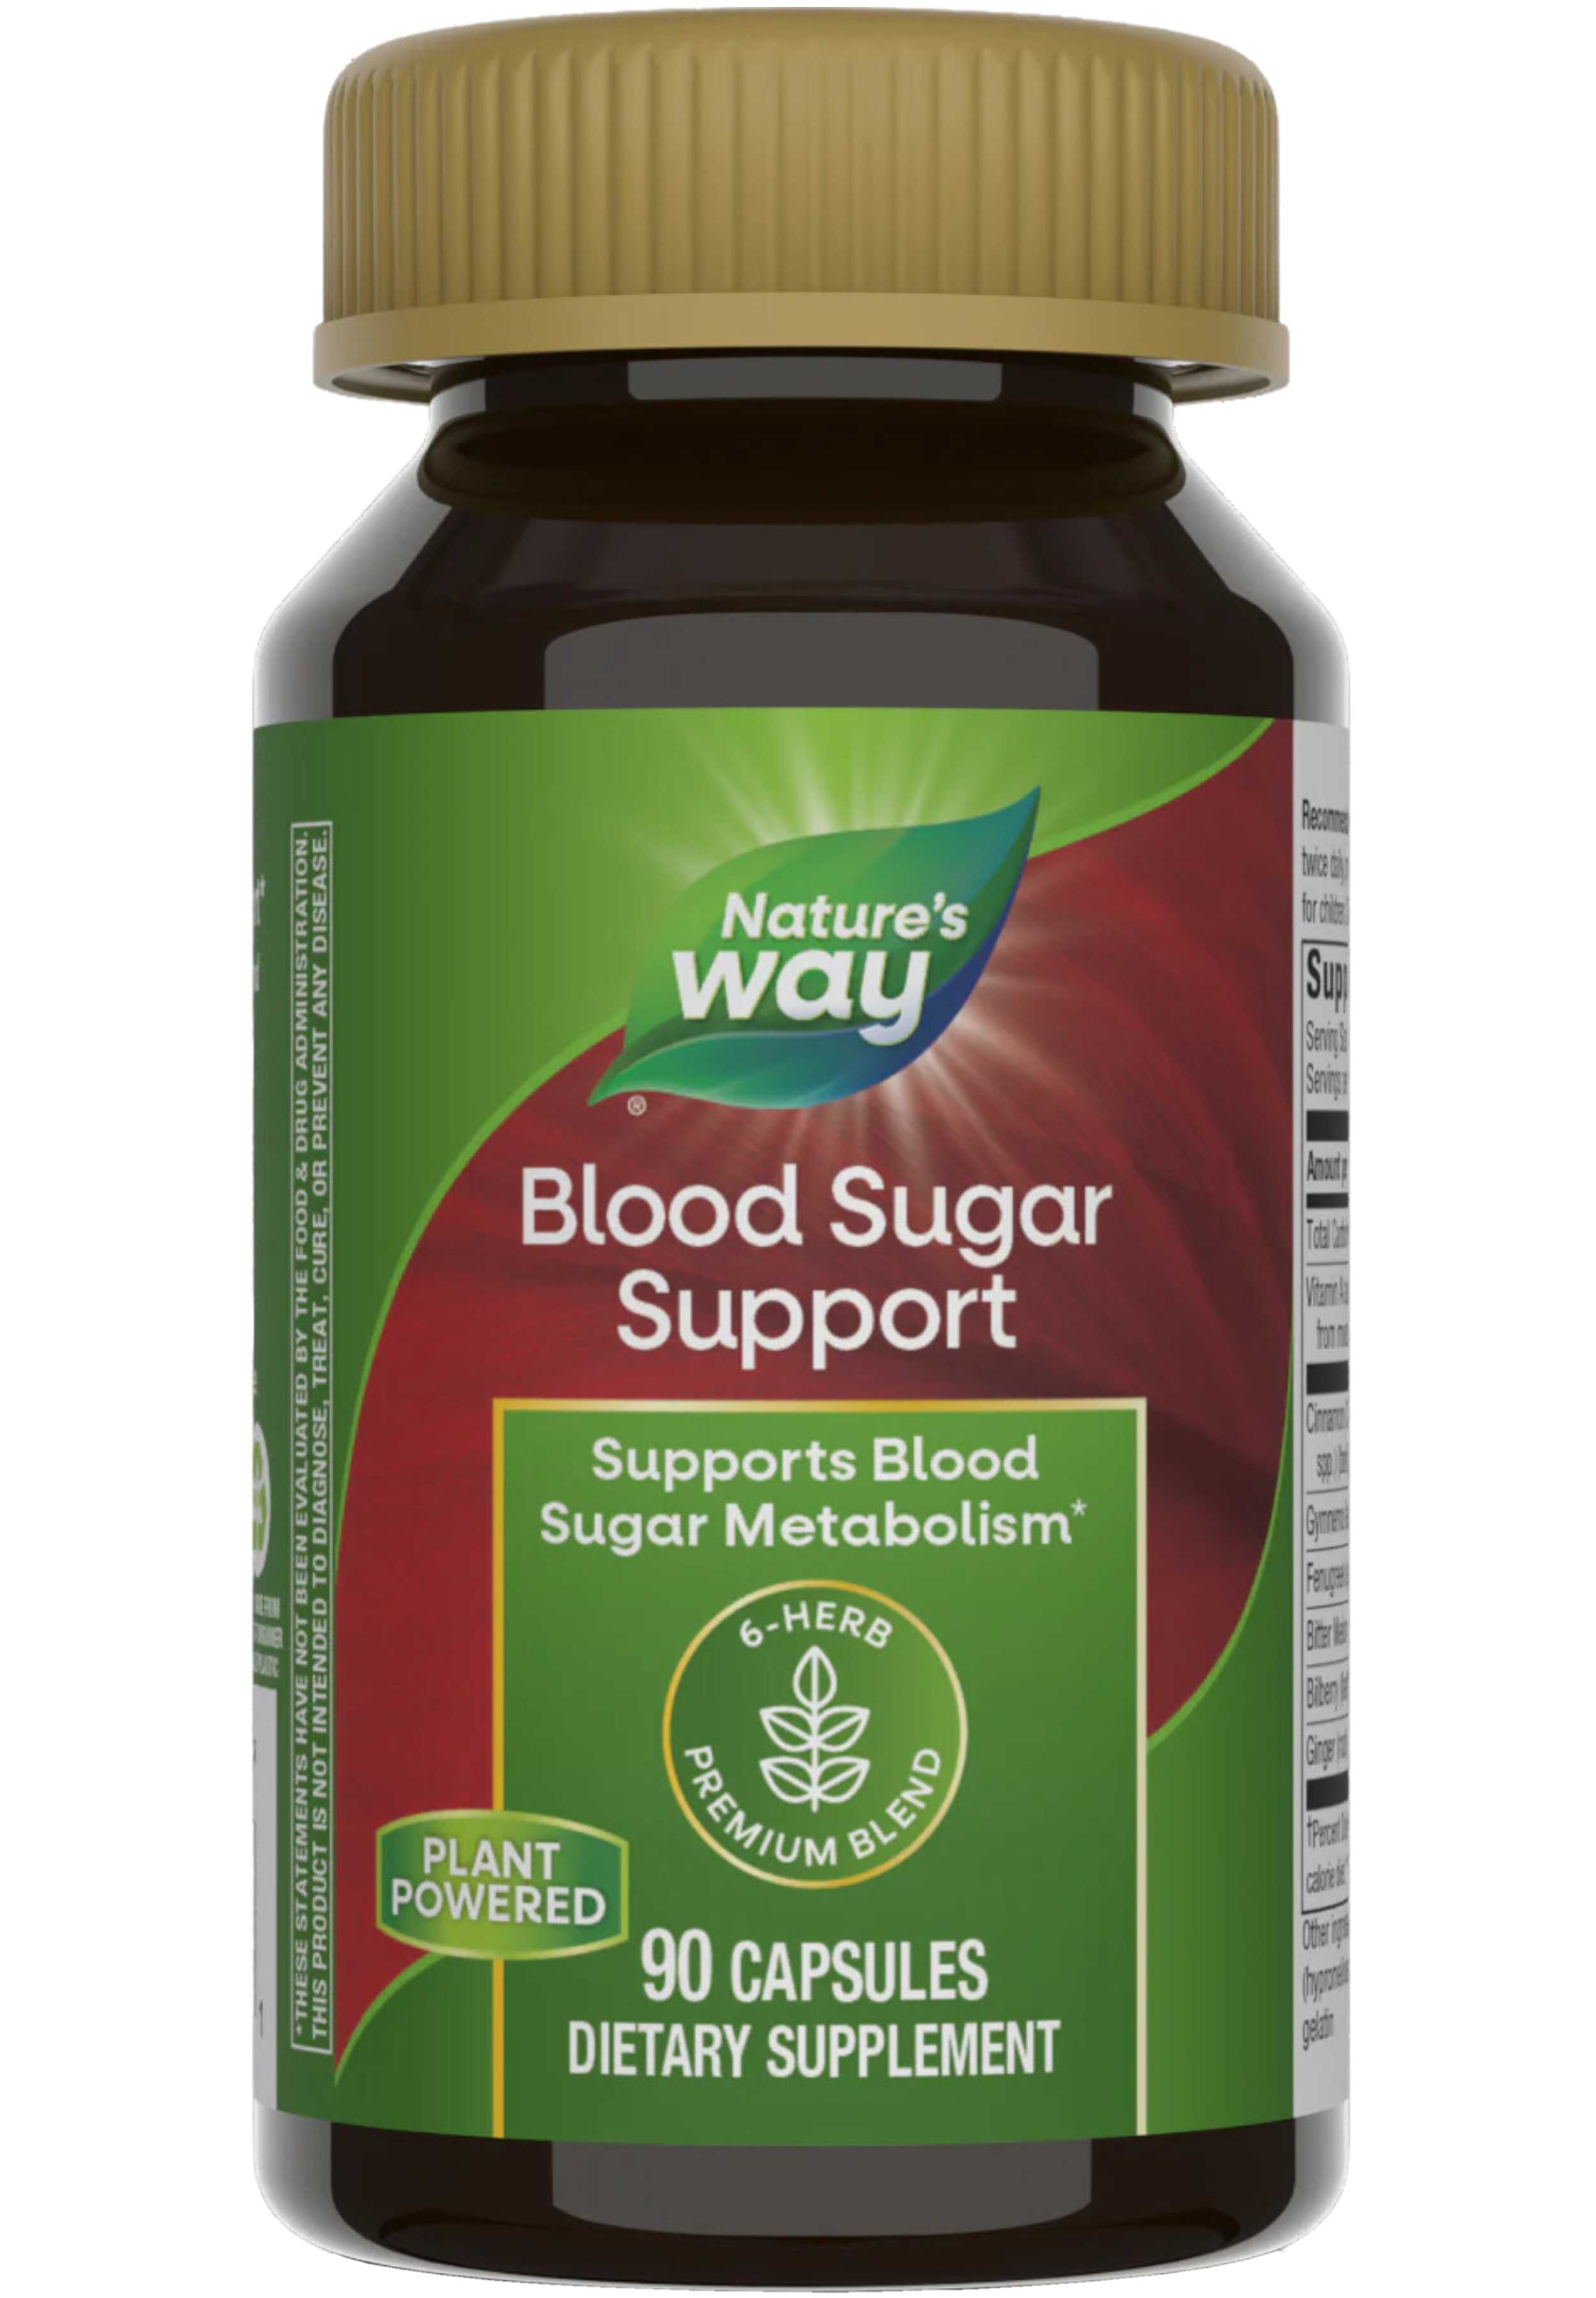 Nature's Way Blood Sugar Support